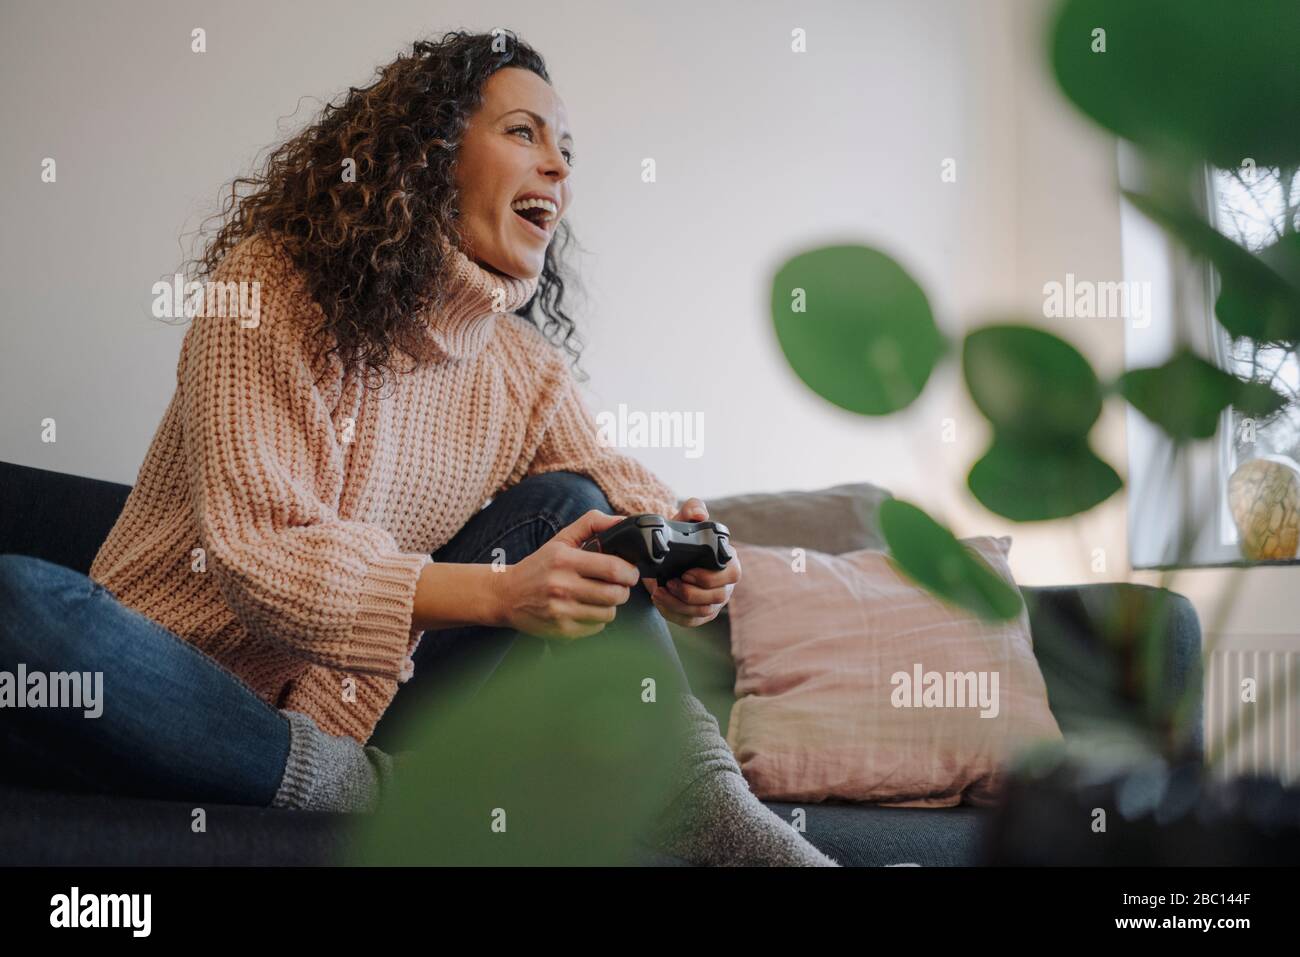 Woman sitting on couch, having fun, playing with a gaming console Stock Photo